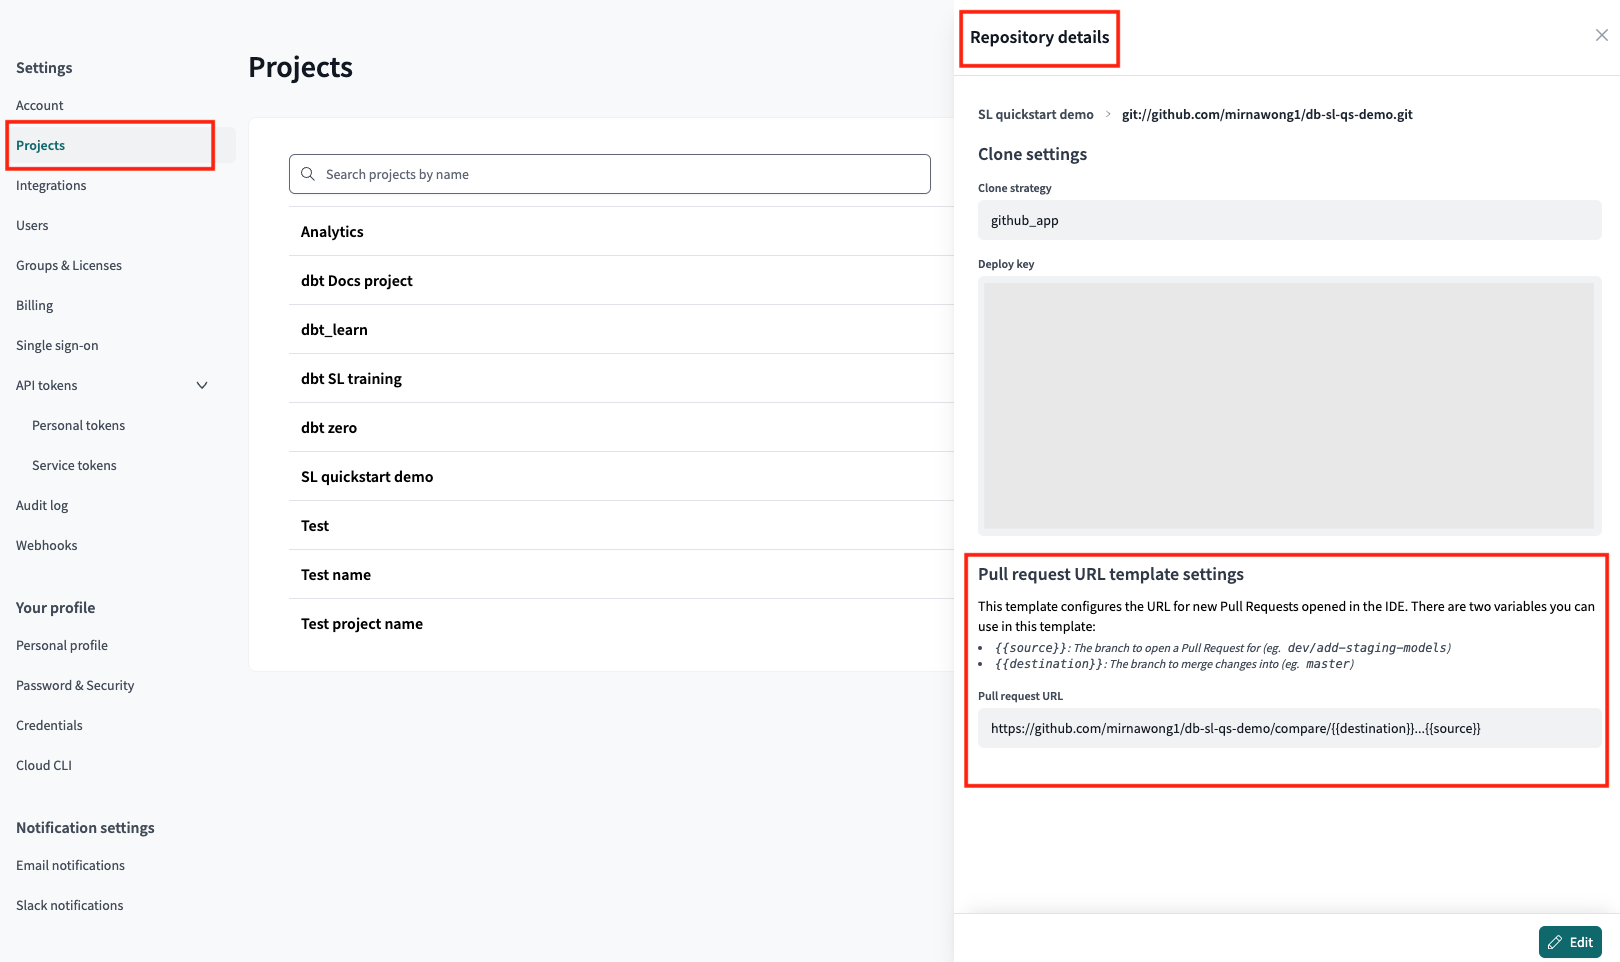 Configure a PR template in the 'Repository details' page.